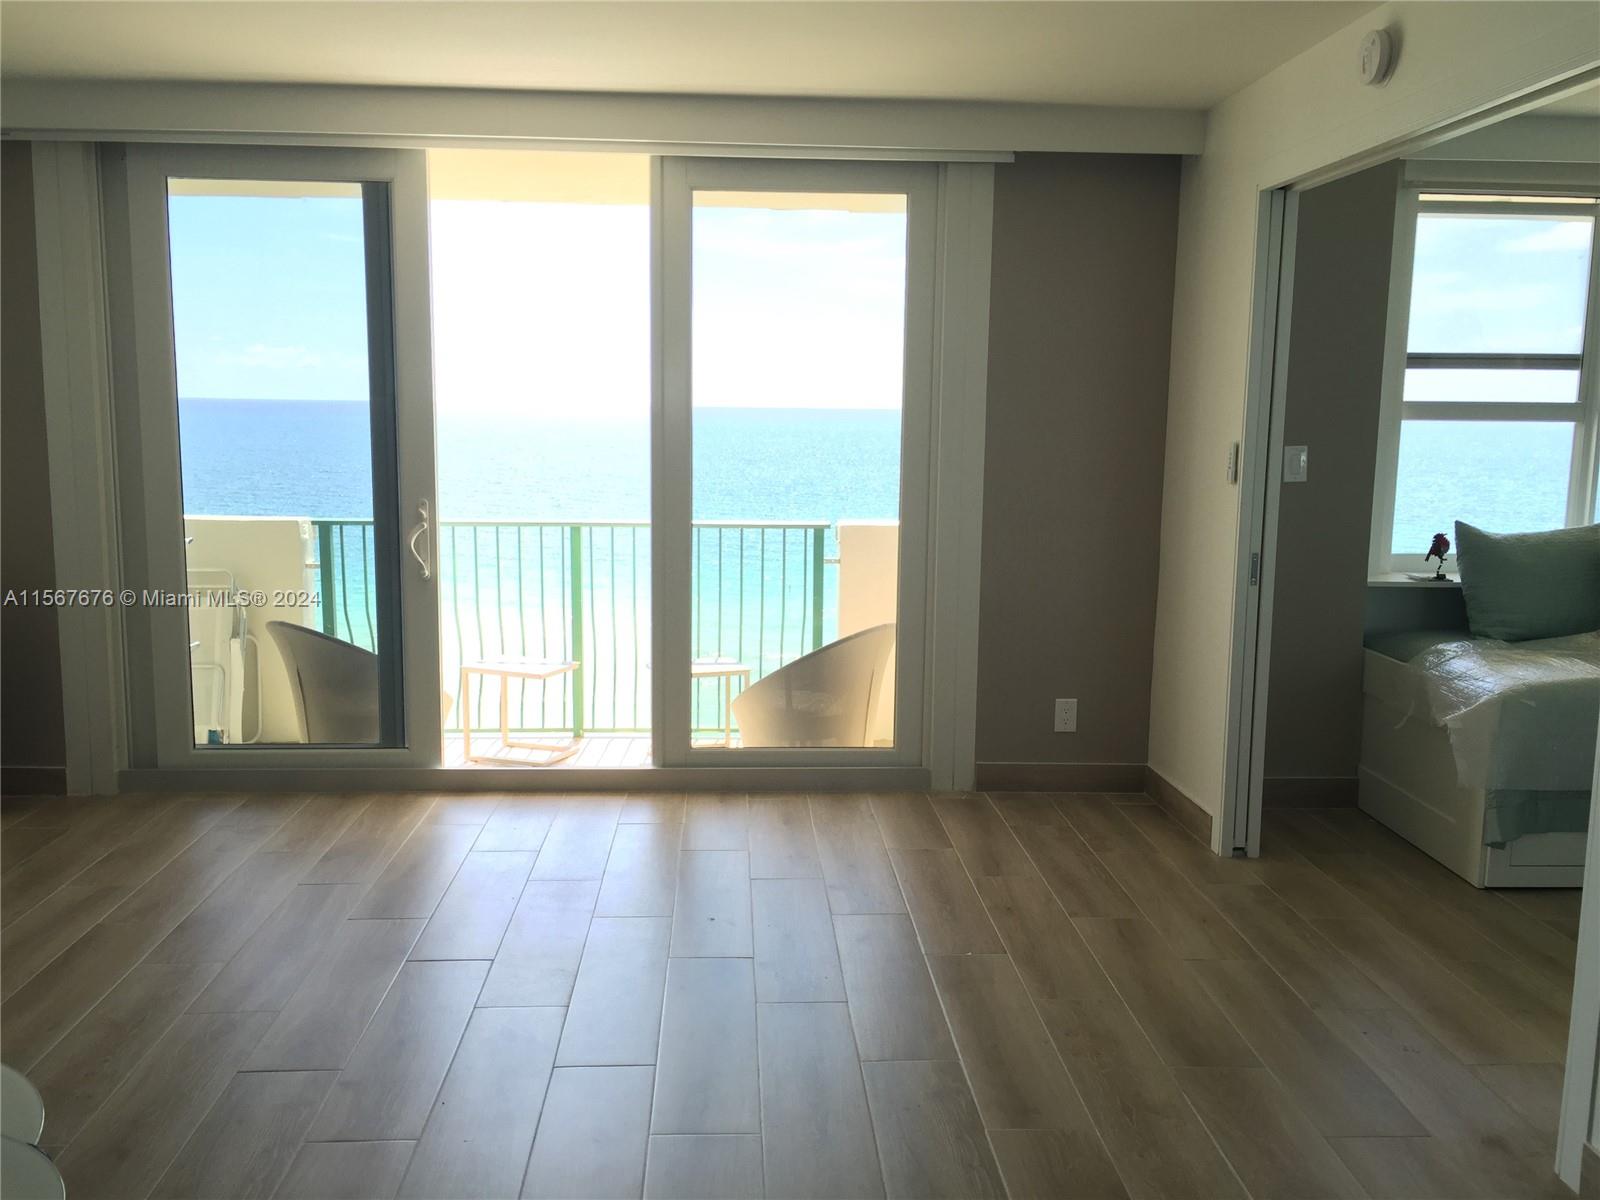 Amazing apartment ocean front view, 2 bedroom and 2 bathroom. The building is located on the beach and very close to restaurants. It has a garage